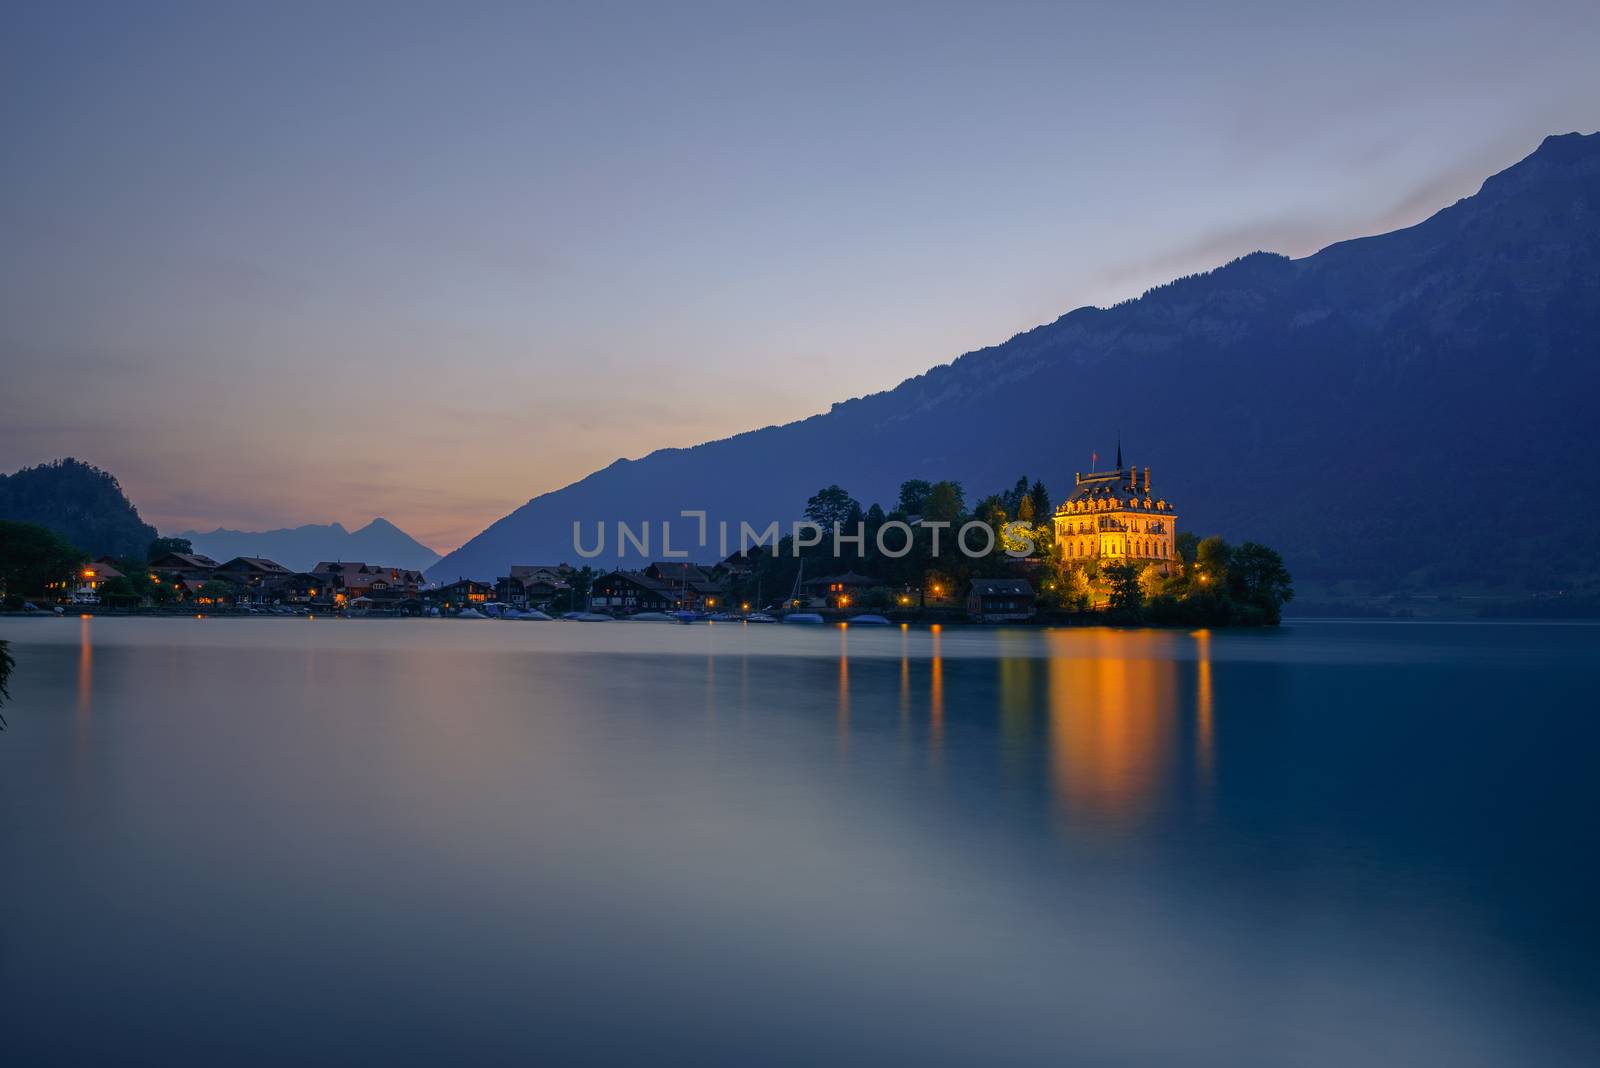 Iseltwald peninsula and former castle in Switzerland by nickfox